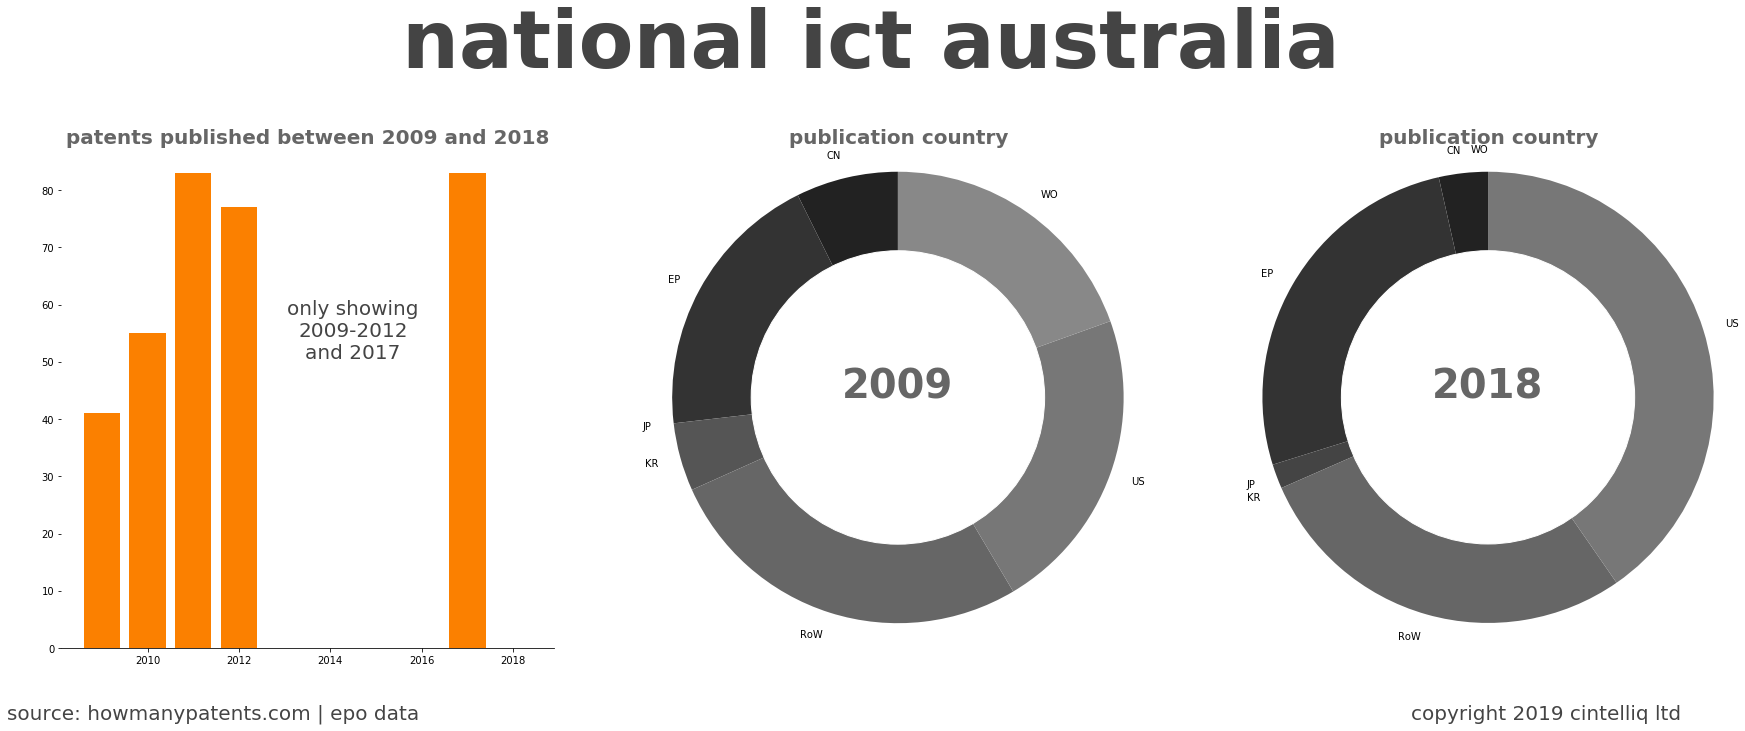 summary of patents for National Ict Australia